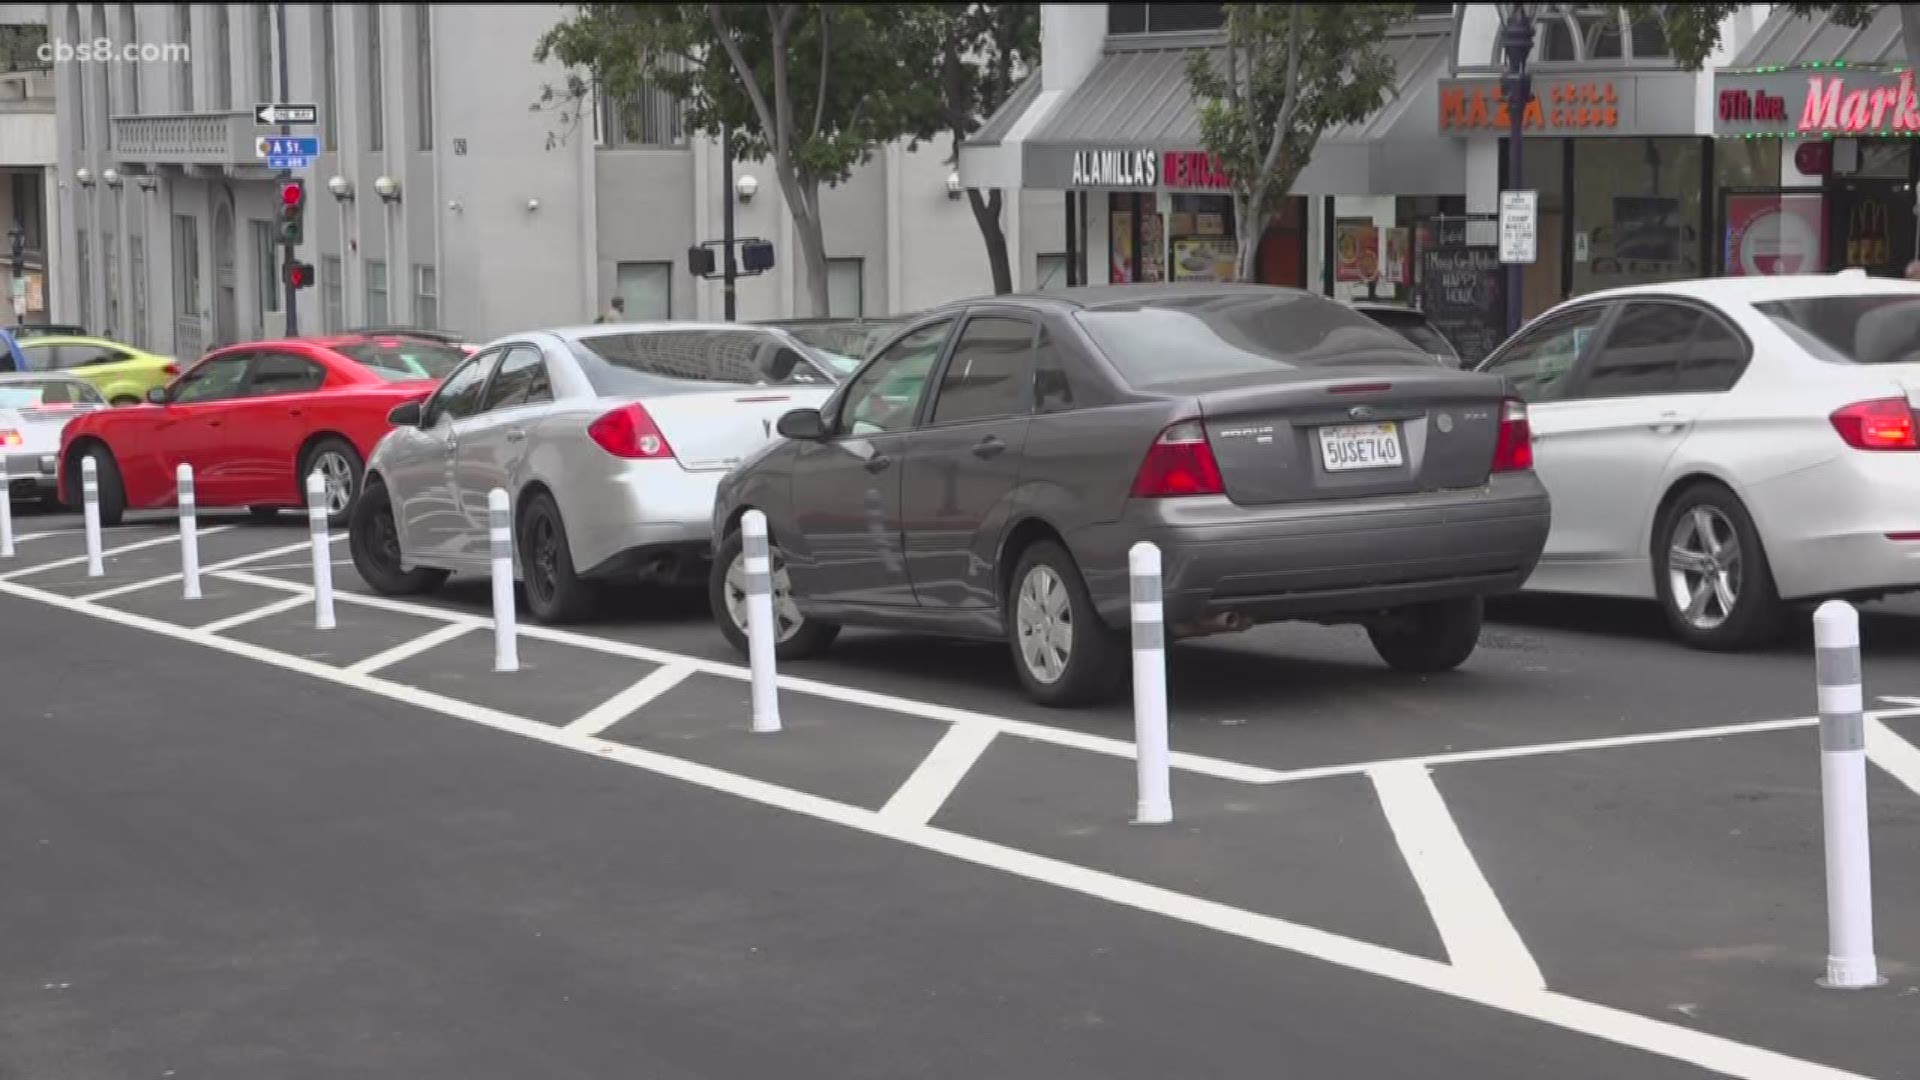 The new protected bike lanes unveiled last week in downtown San Diego designed to increase safety are also increasing confusing among divers.